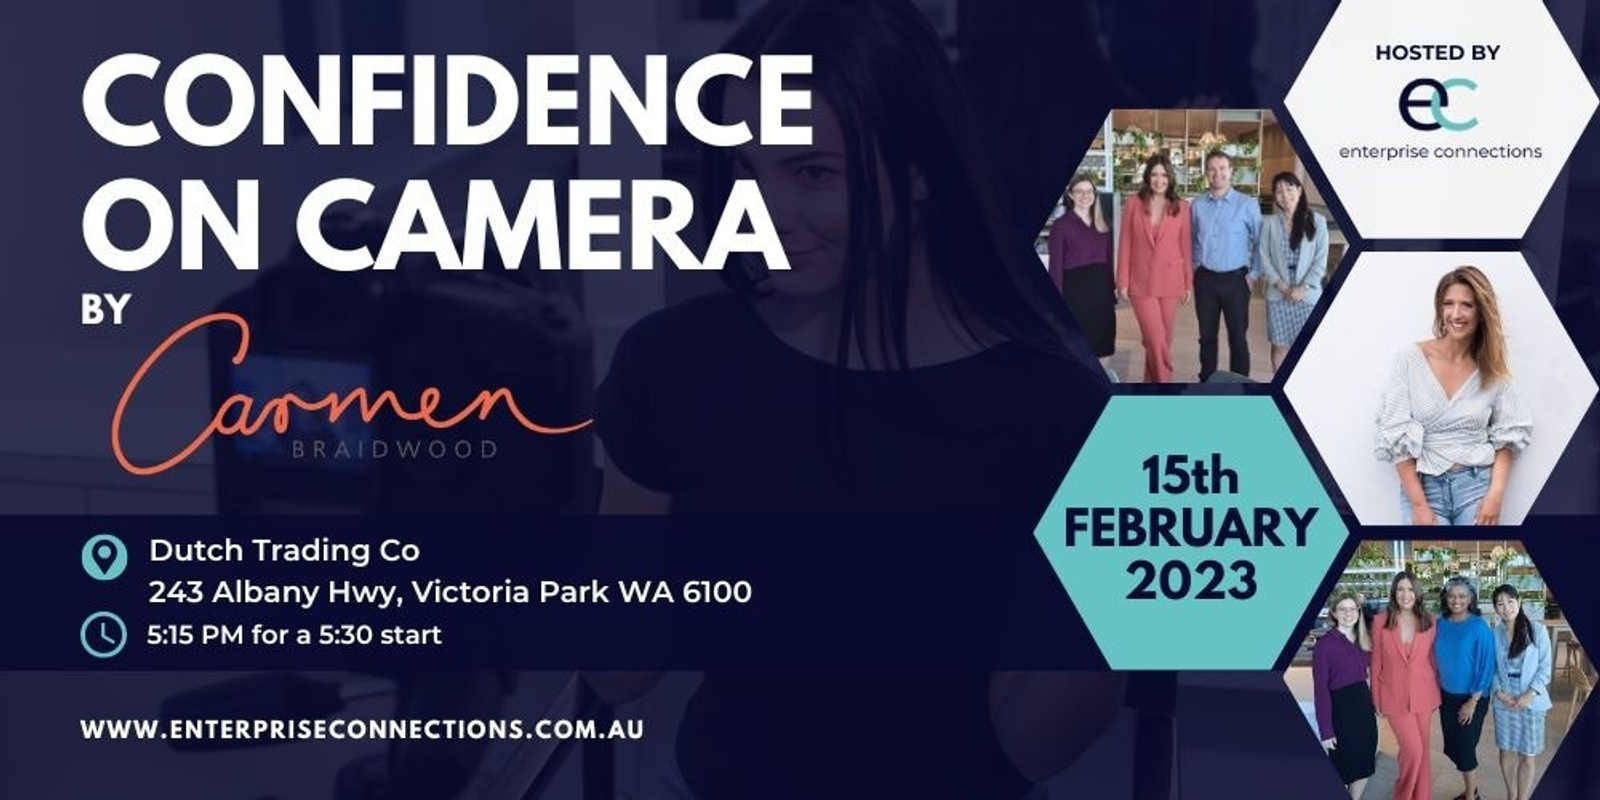 Banner image for February - Confidence on camera by Carmen Braidwood- Hosted by Enterprise Connections